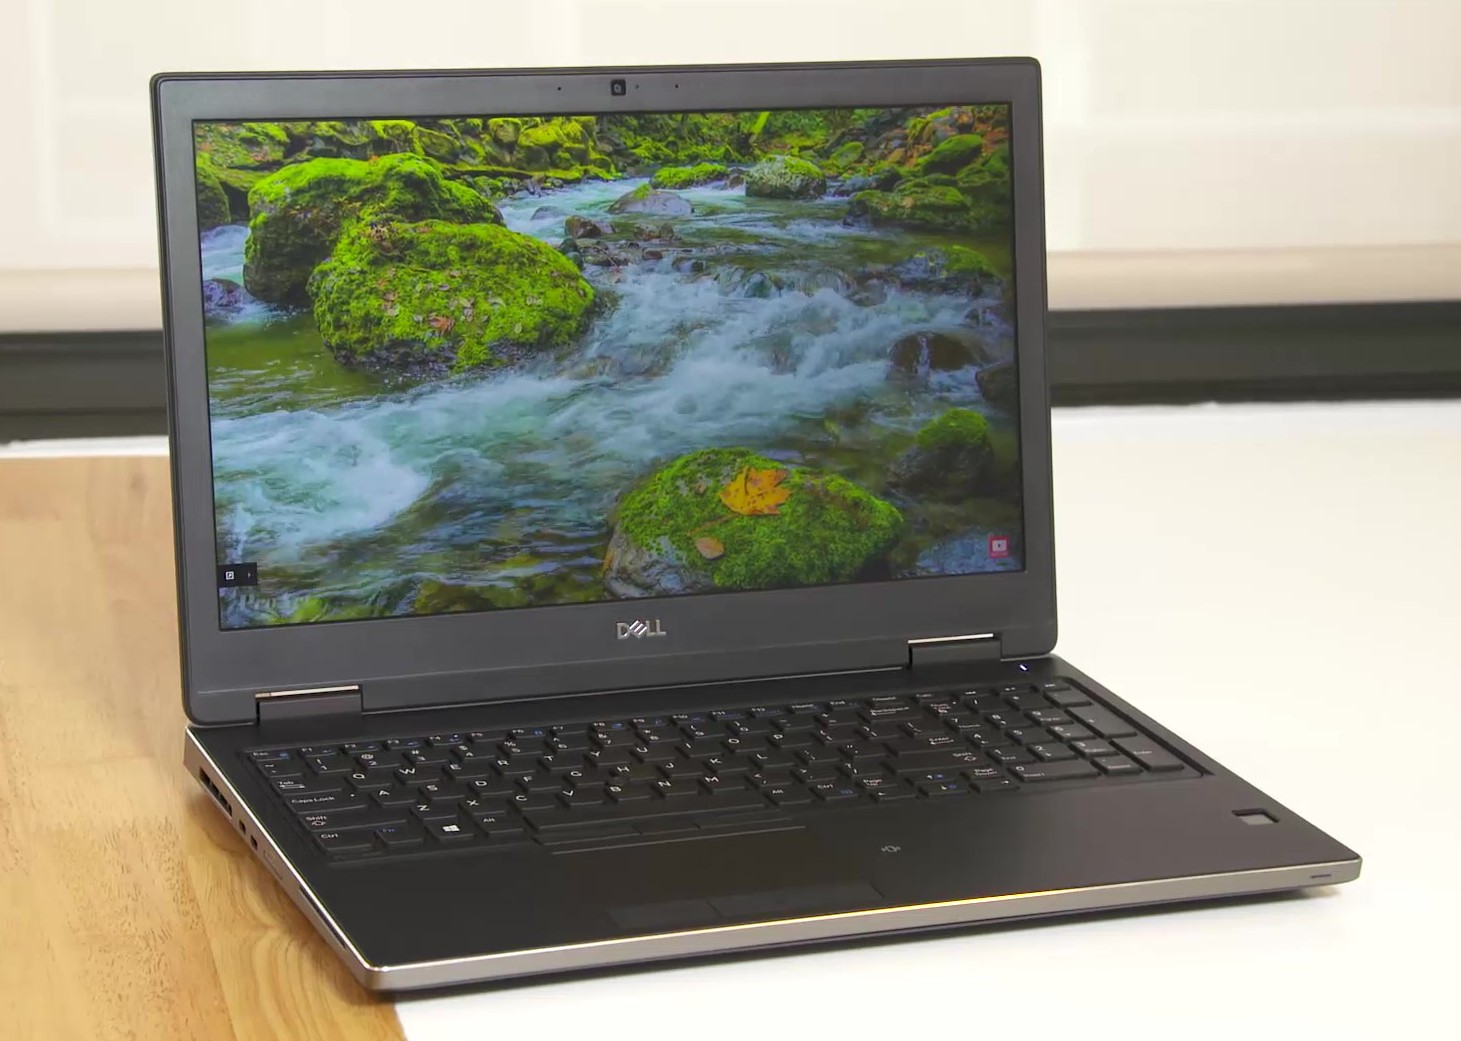 This image shows the Dell Precision 17 7730.